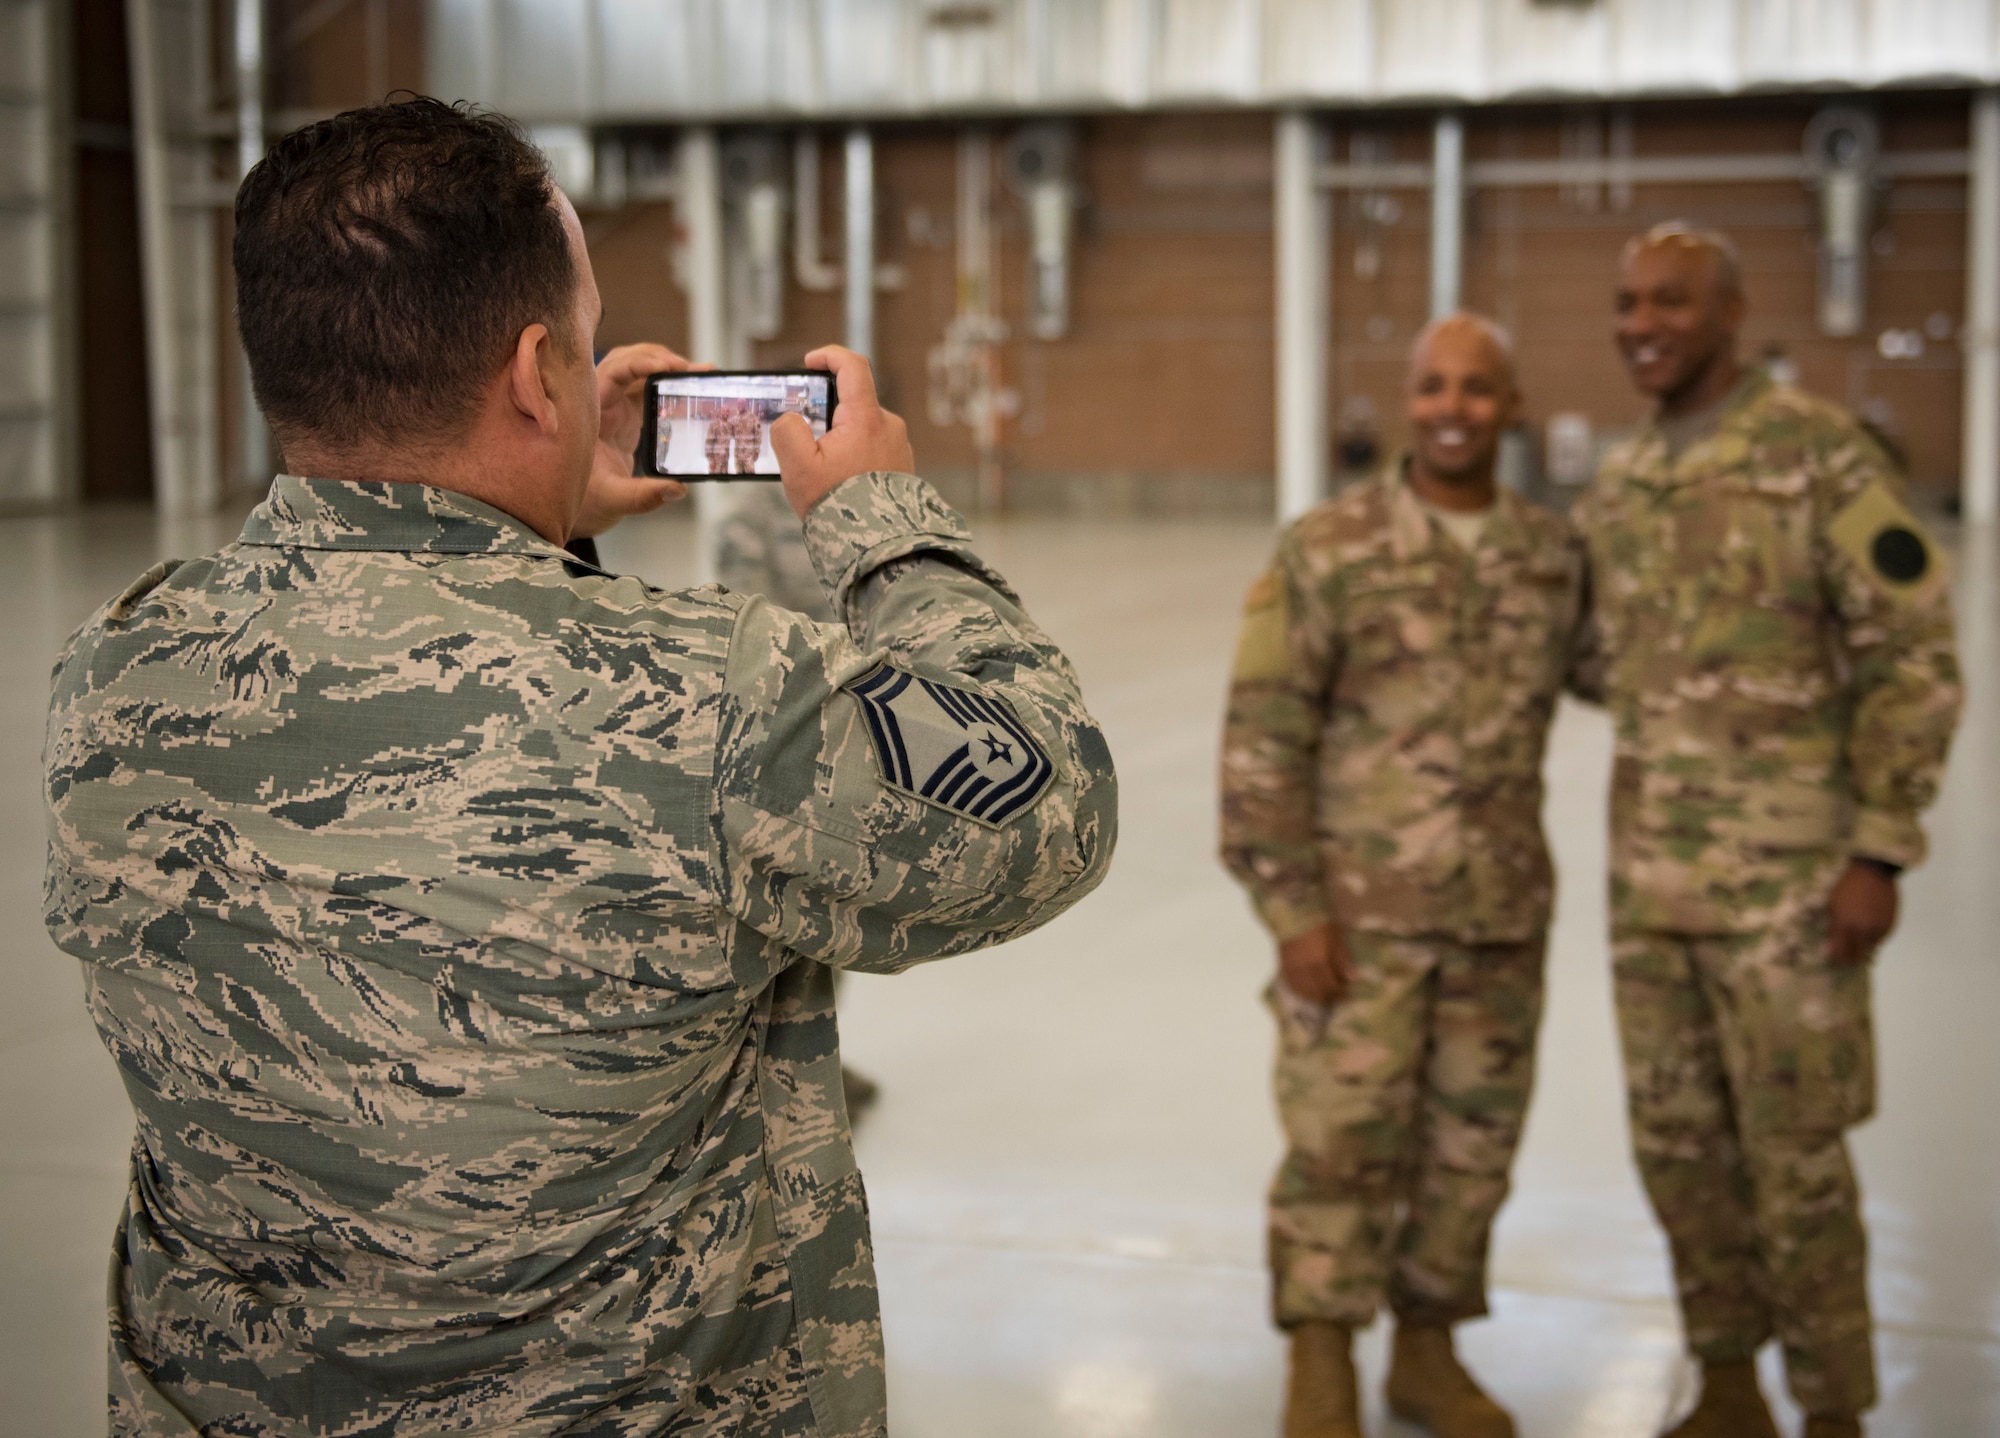 An Airman poses for a photo with Chief Master Sgt. of the Air Force Kaleth O. Wright during a base tour Oct. 19, 2018, at Nellis Air Force Base, Nevada. After speaking with multiple units across Nellis, dozens of Airmen lined up to get a photo with Wright. (U.S. Air Force photo by Airman 1st Class Andrew D. Sarver)